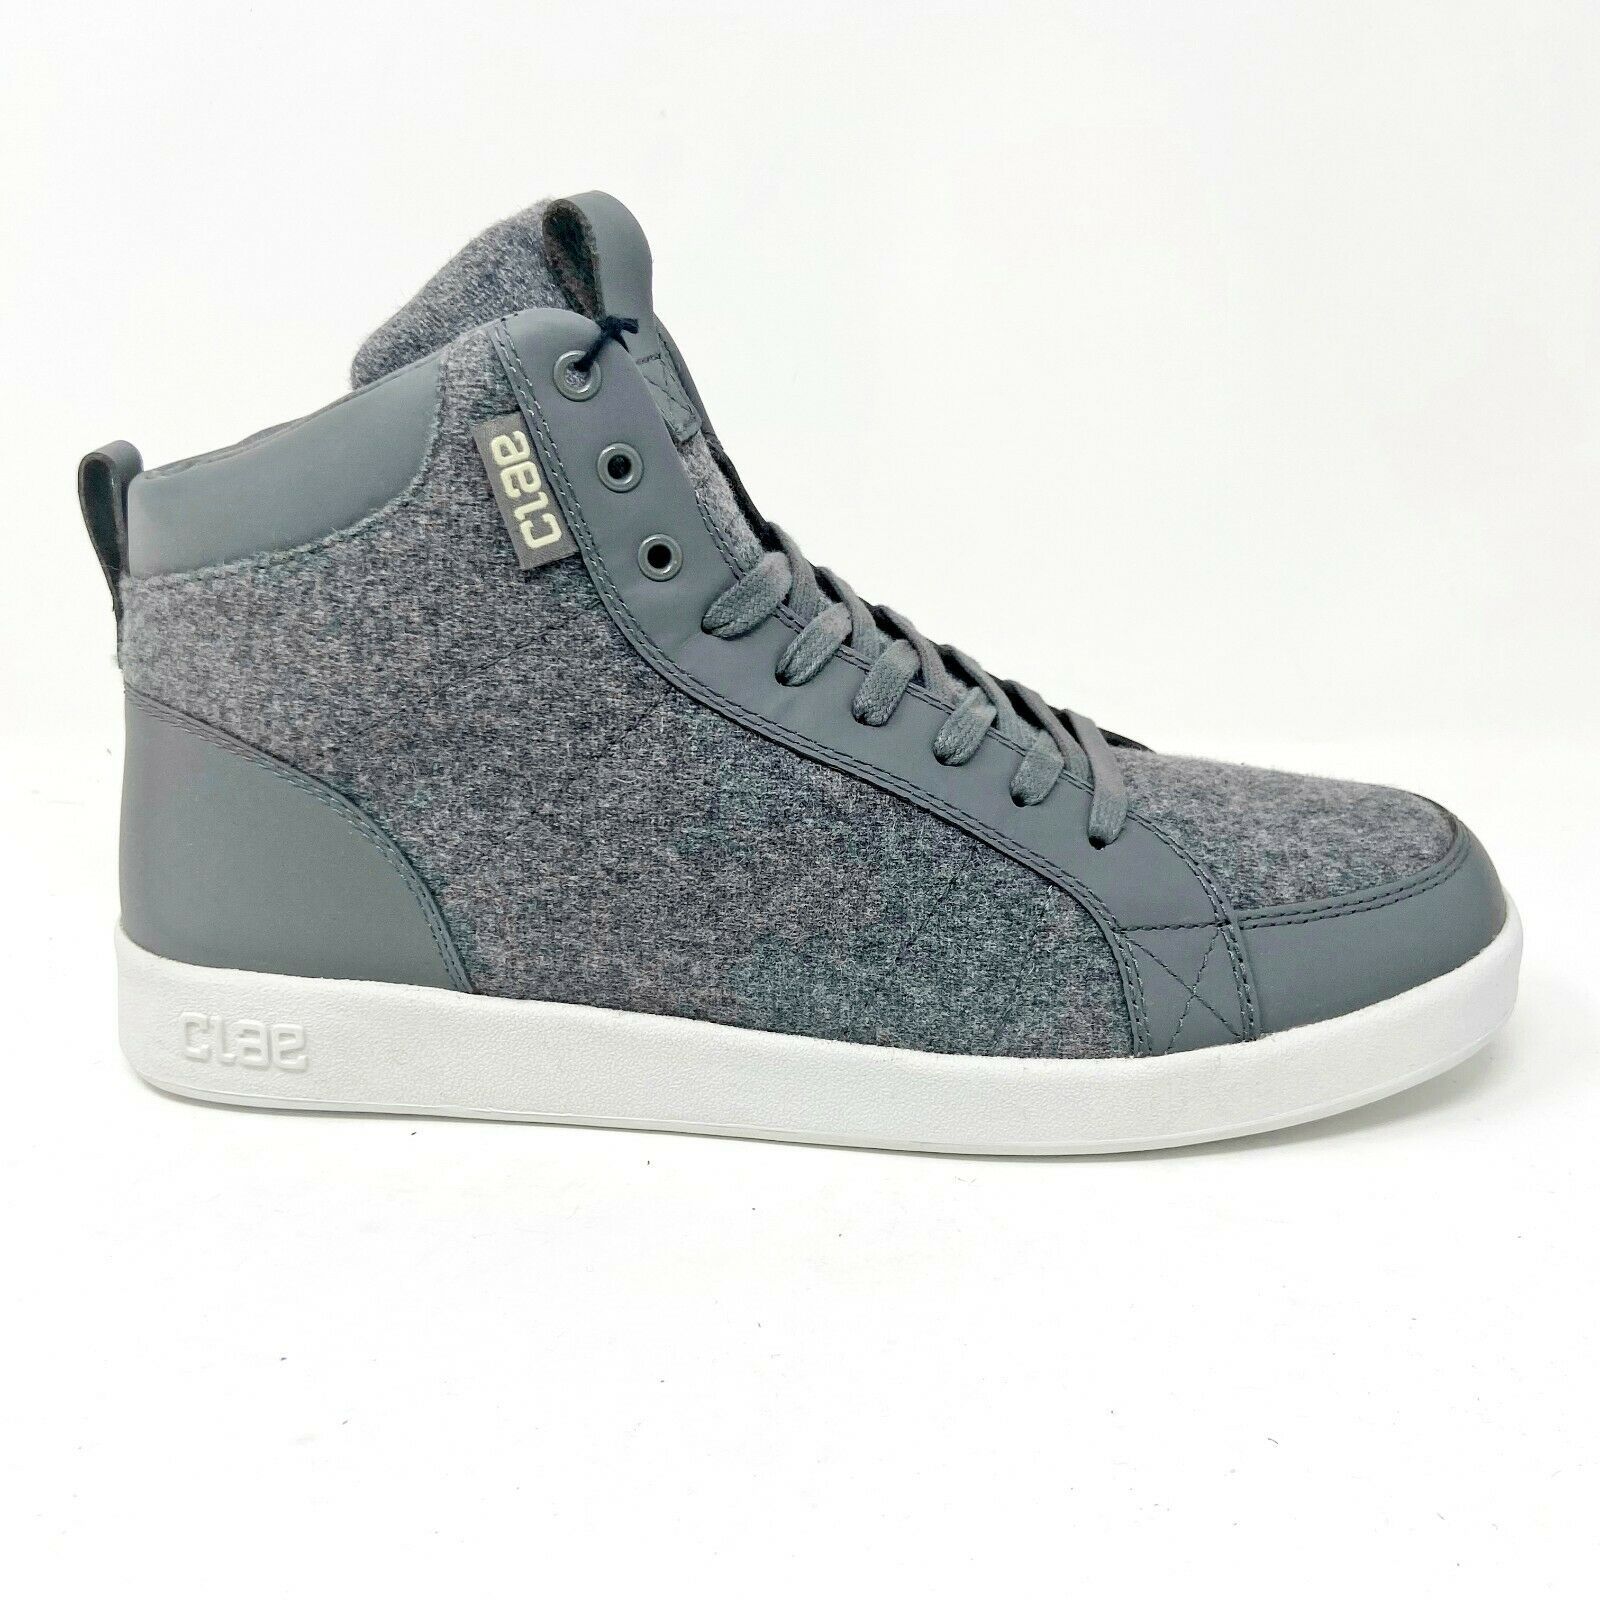 Primary image for Clae Russell Charcoal Grey Wool Mens Casual Sneakers